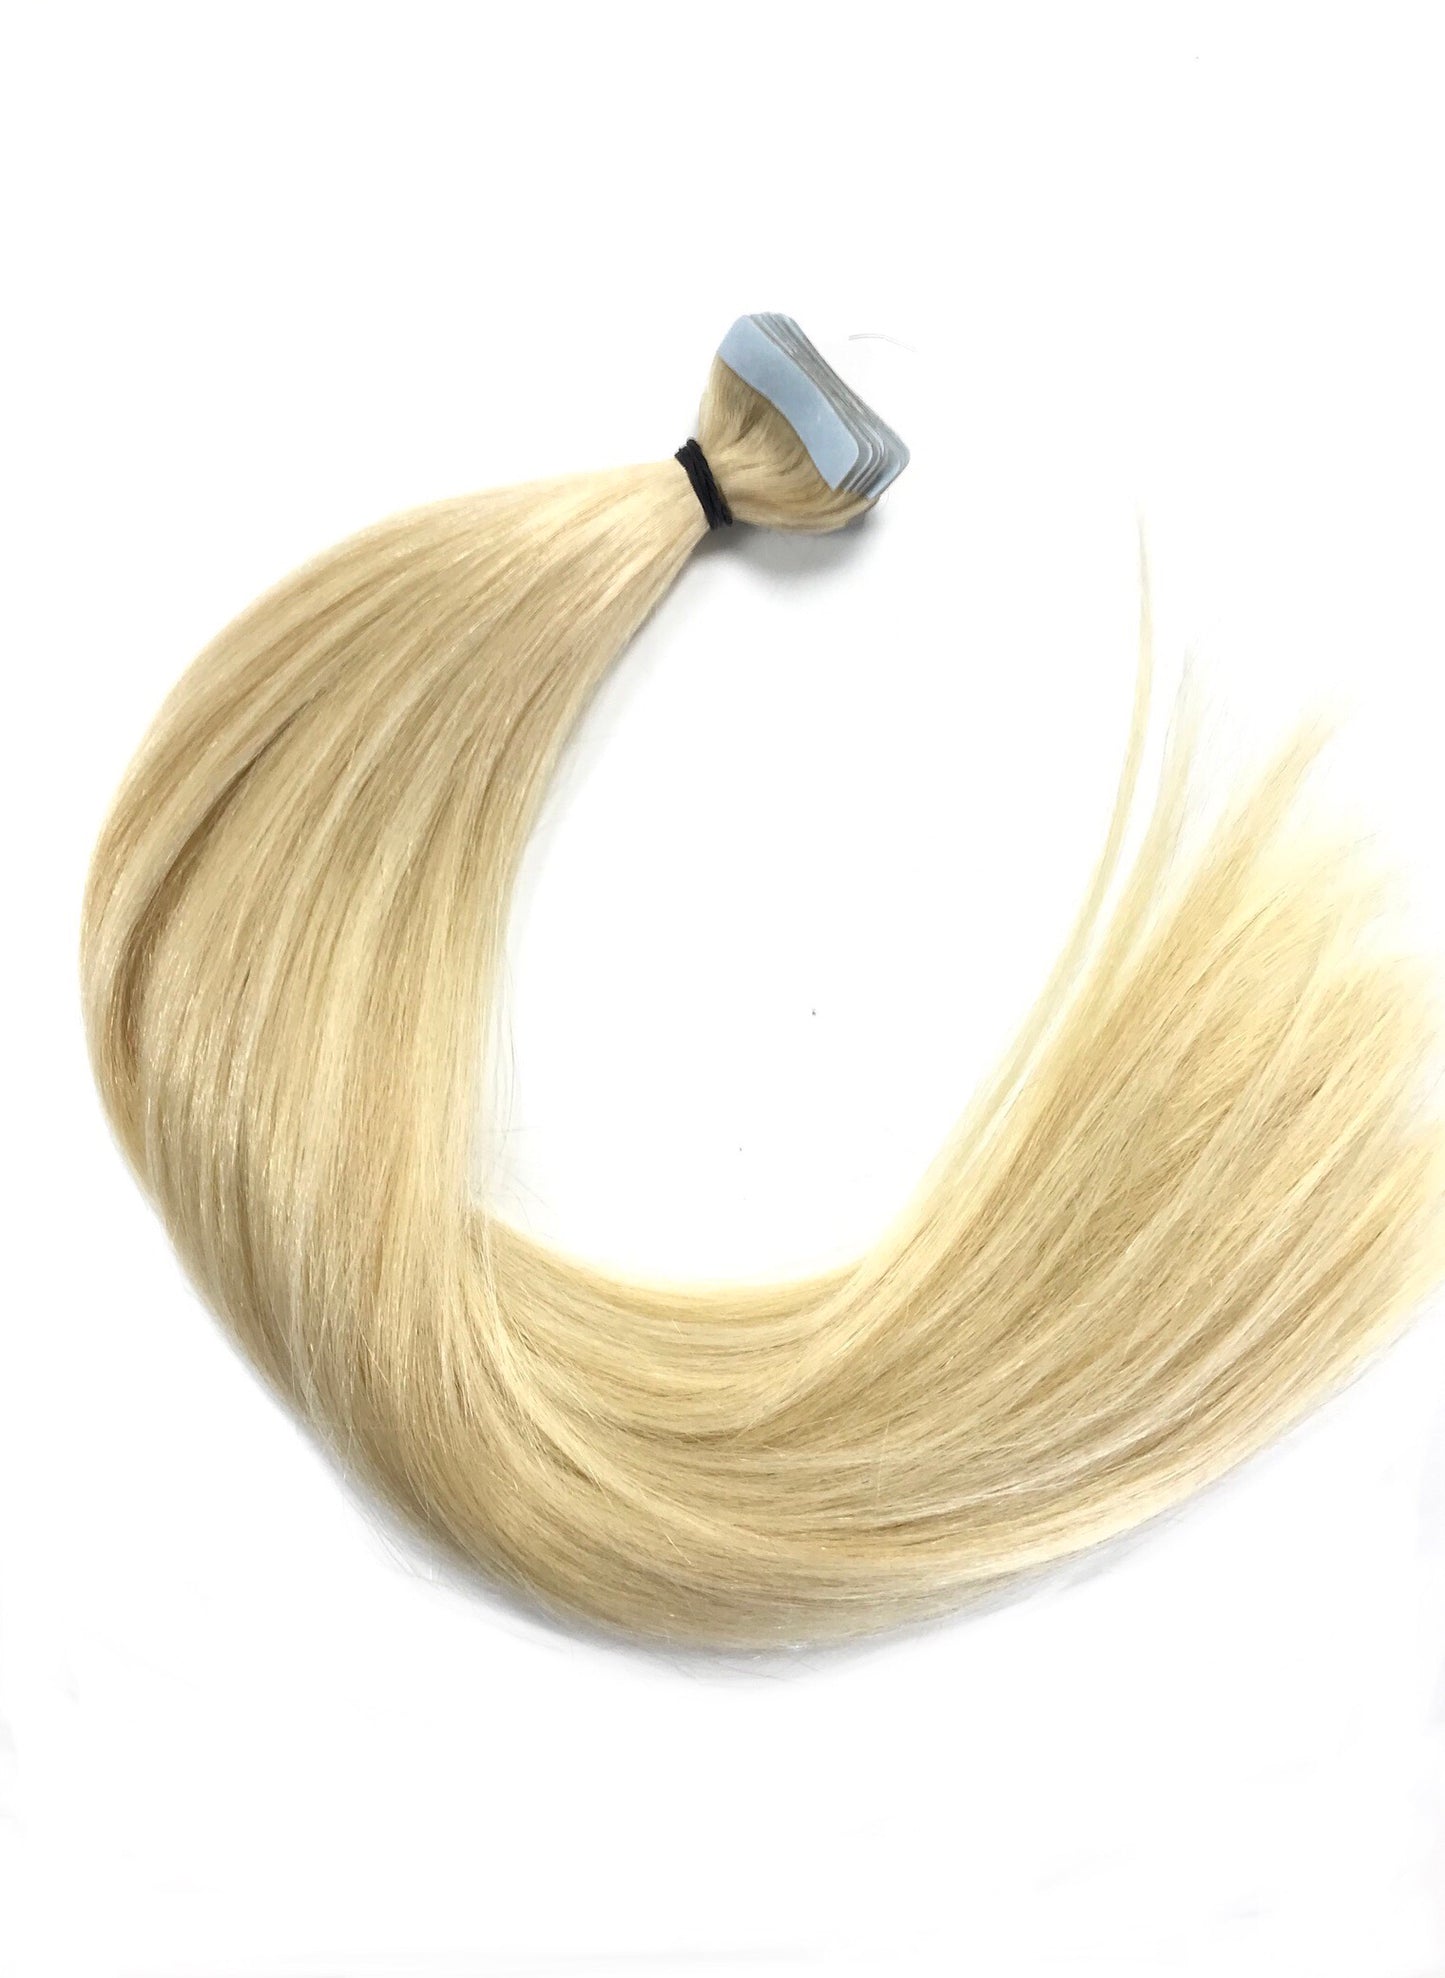 Russian Virgin Remy Human Hair, Tape Extensions, Straight, 22'', Blonde. Quick Shipping!-Virgin Hair & Beauty, The Best Hair Extensions, Real Virgin Human Hair.